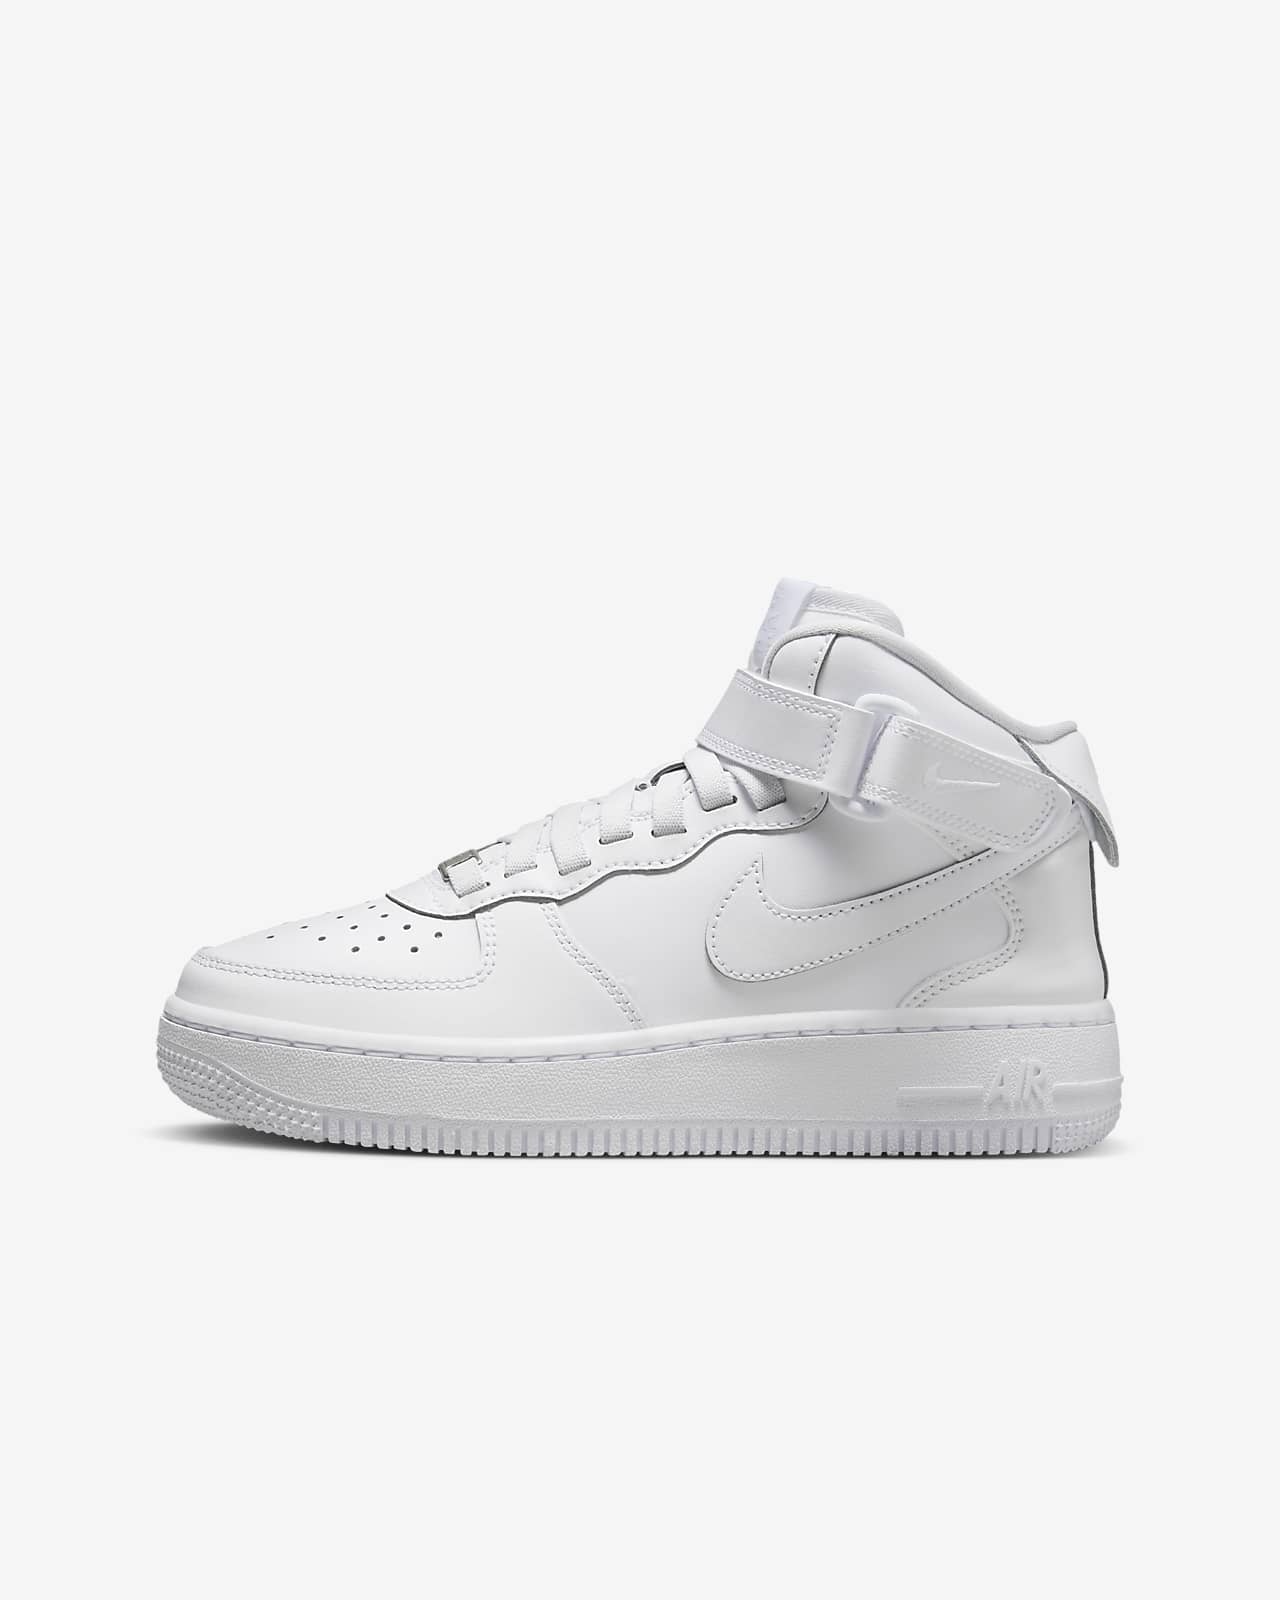 Chaussures Nike Air Force 1 Mid EasyOn pour ado